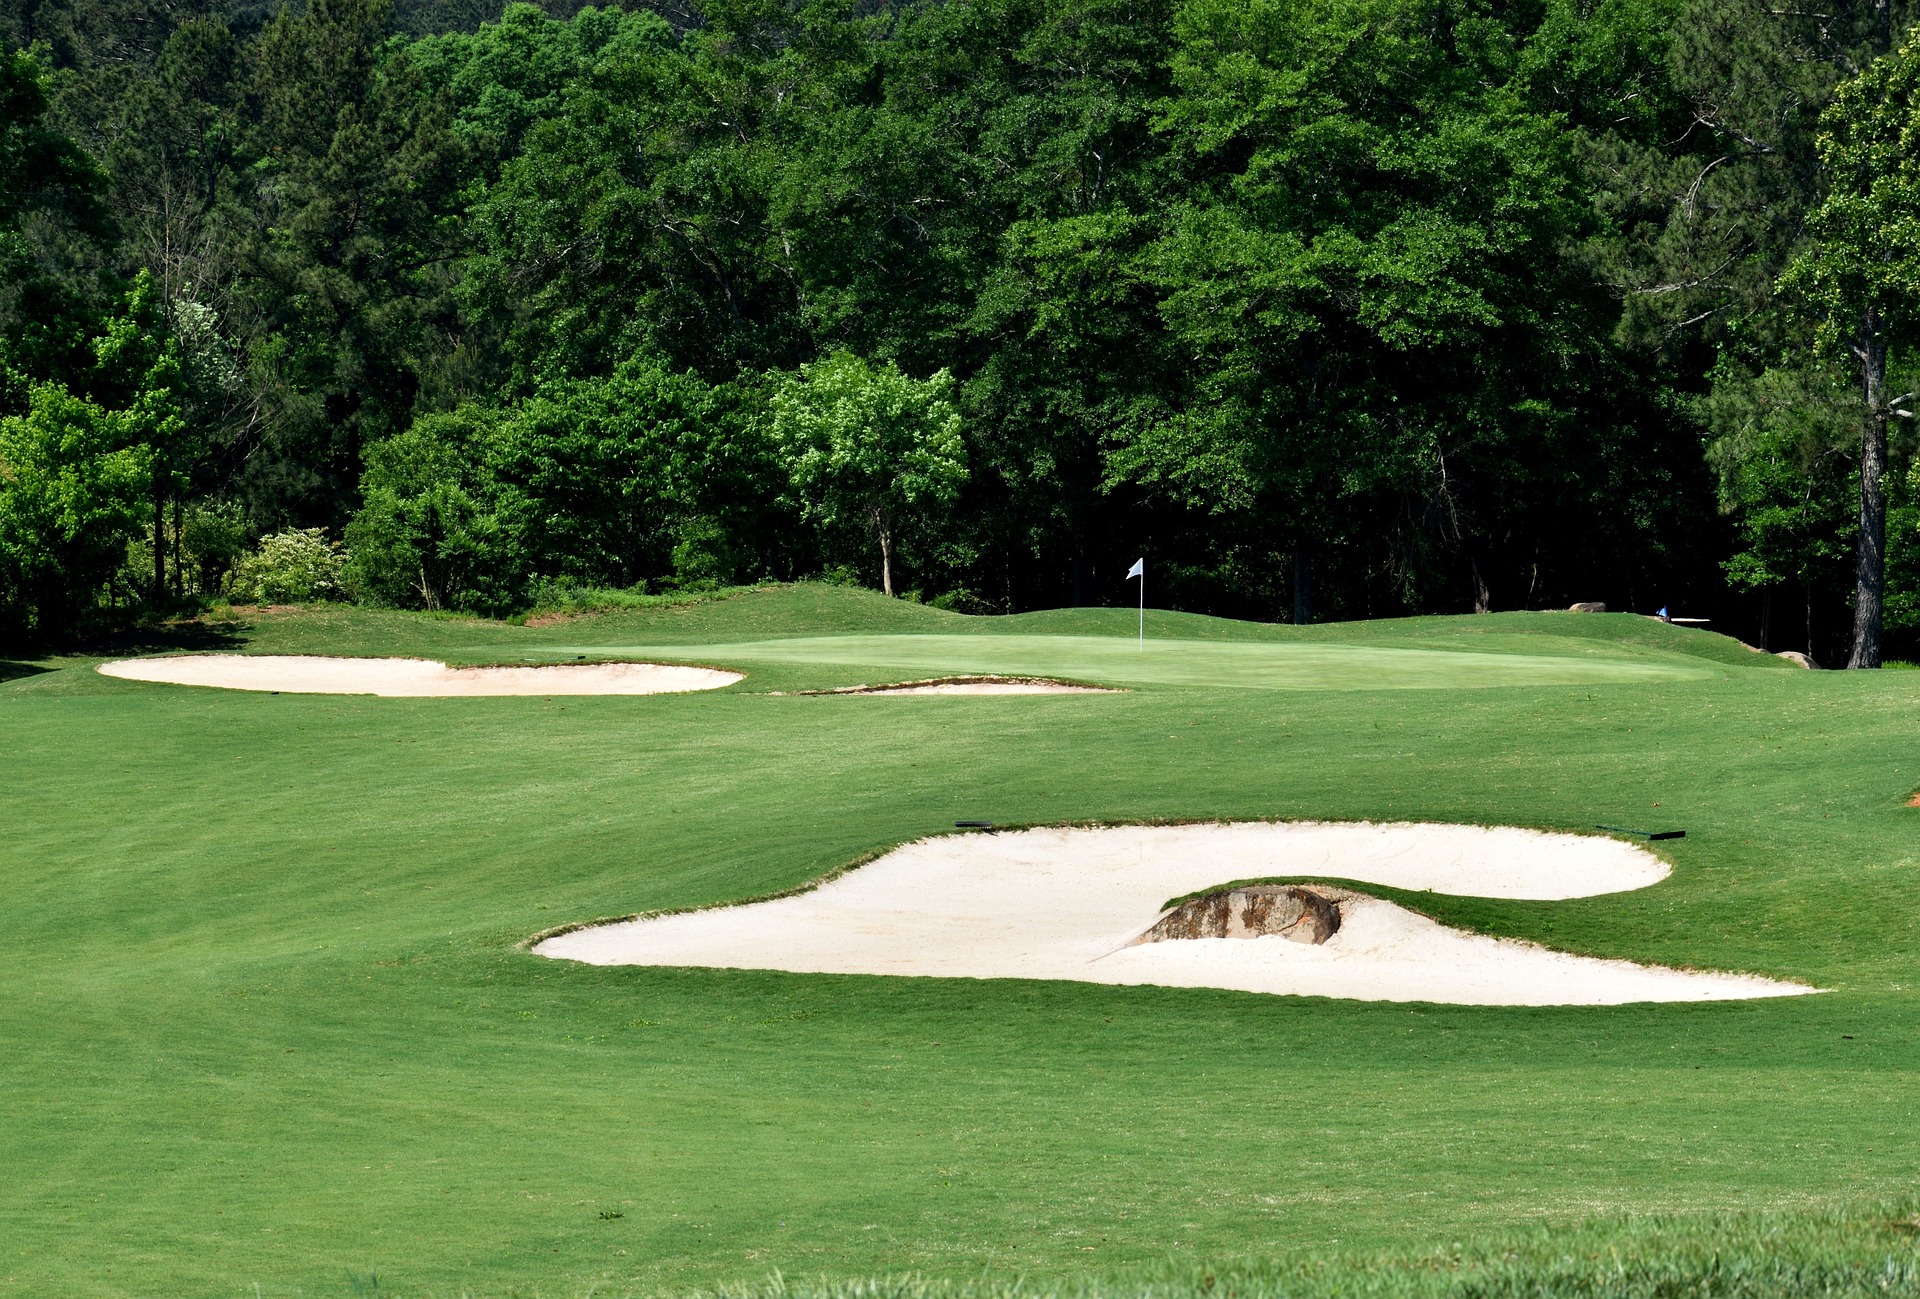 Photo of a golf course with two sand traps around the green.